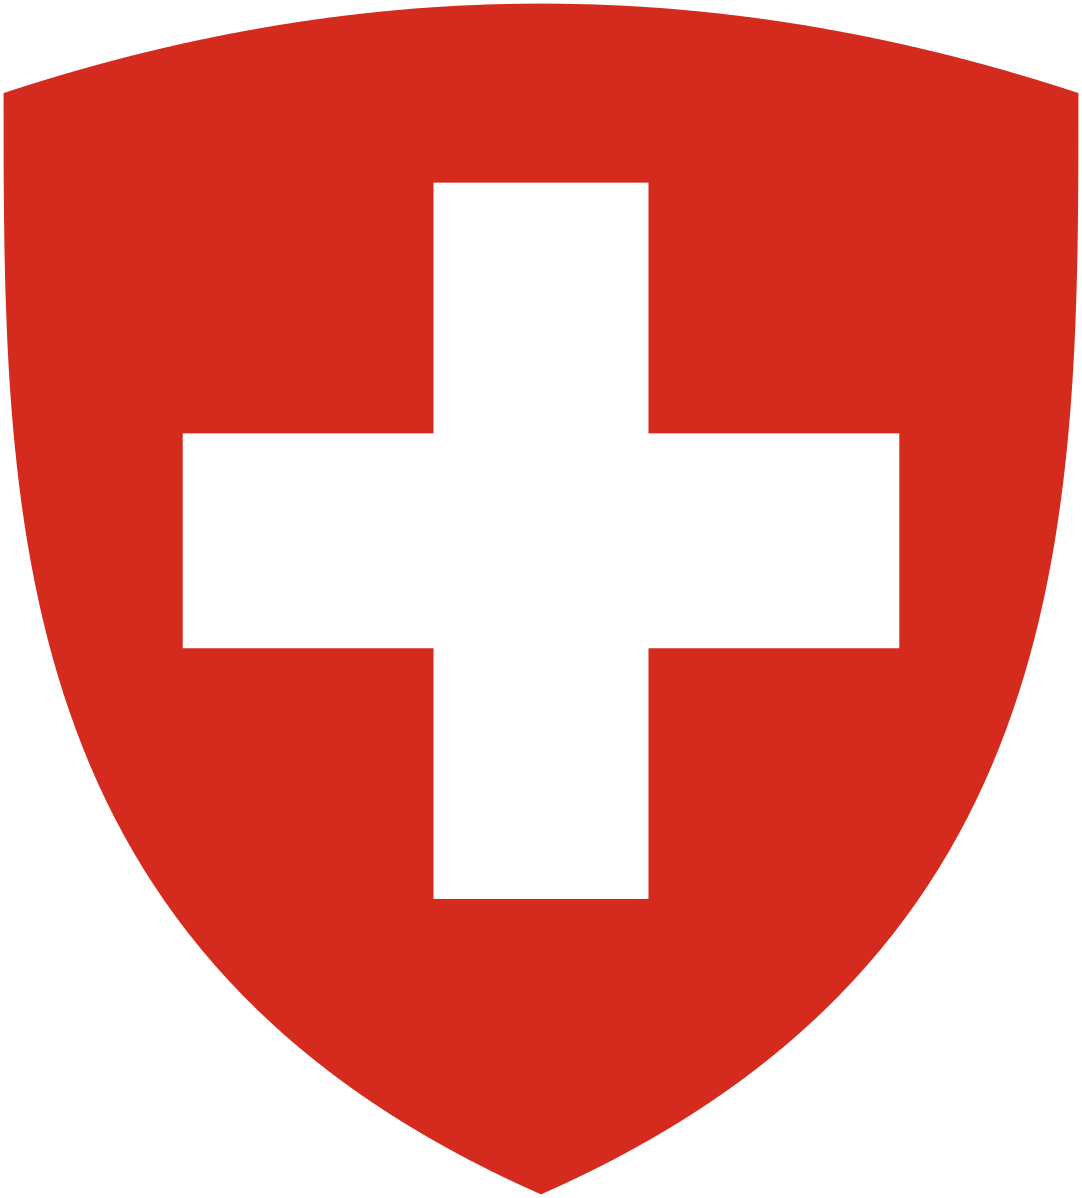 A Red Shield With A White Cross